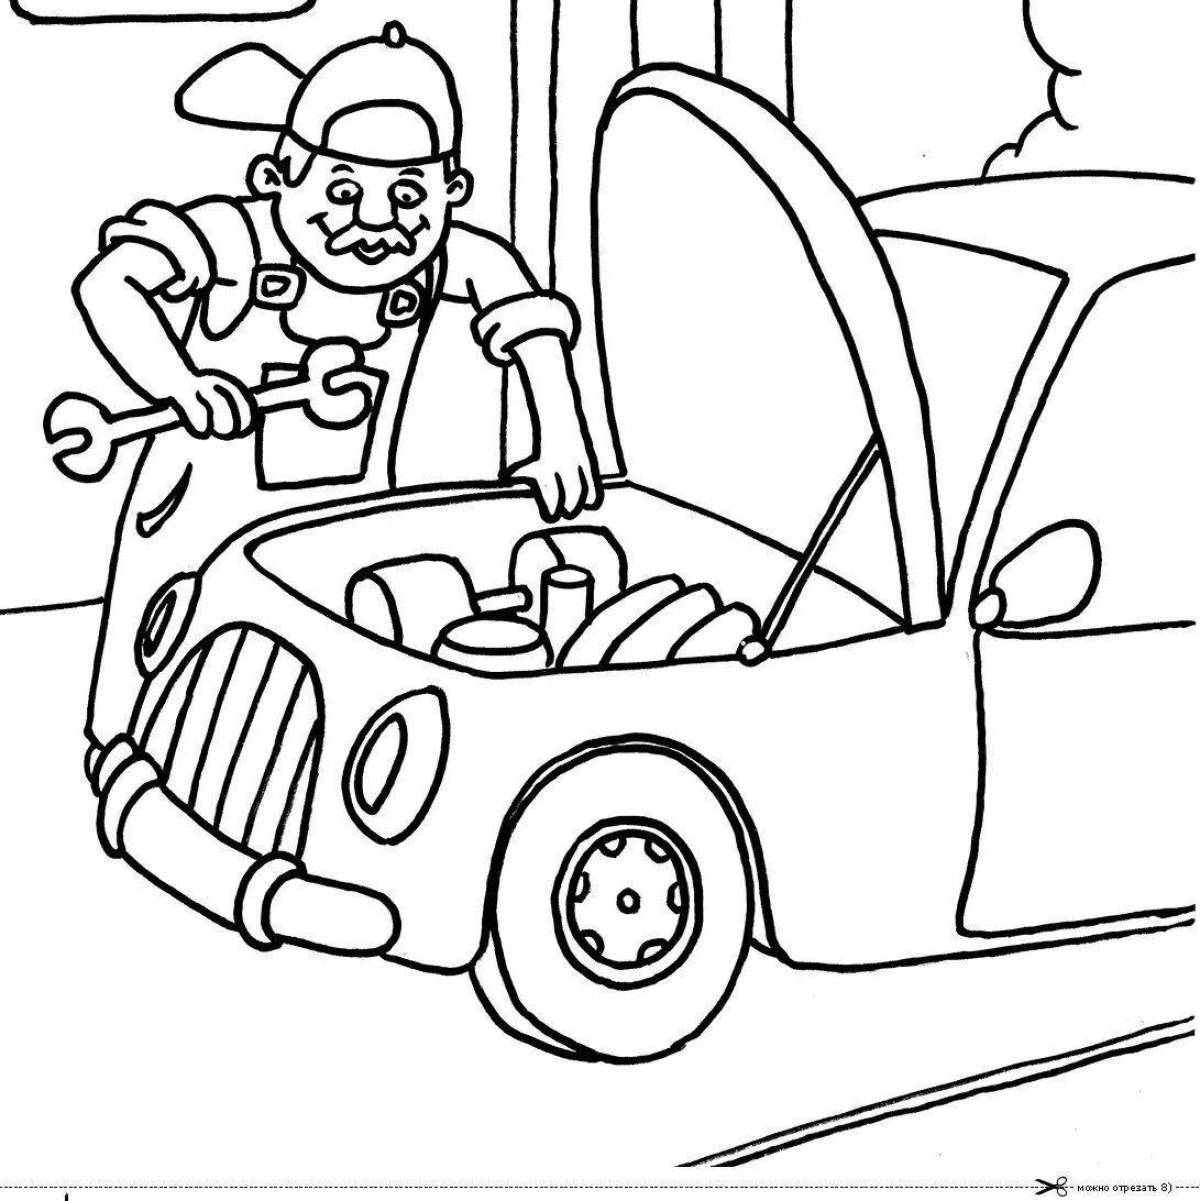 Colorful car mechanic coloring book for kids